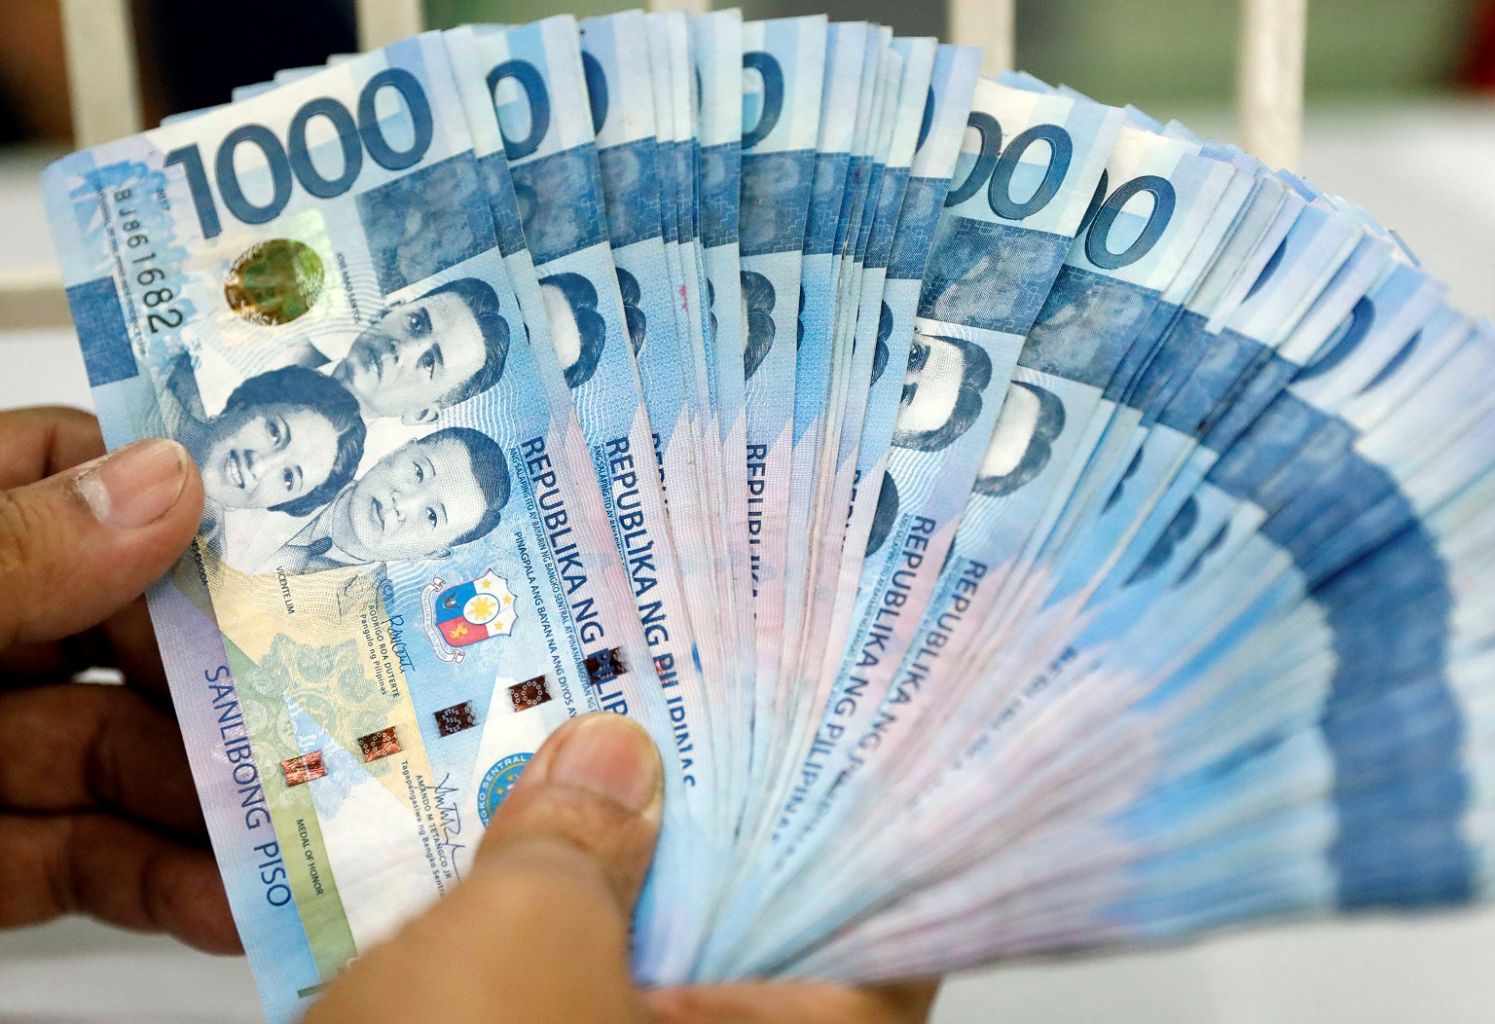 us dollar to philippines peso today